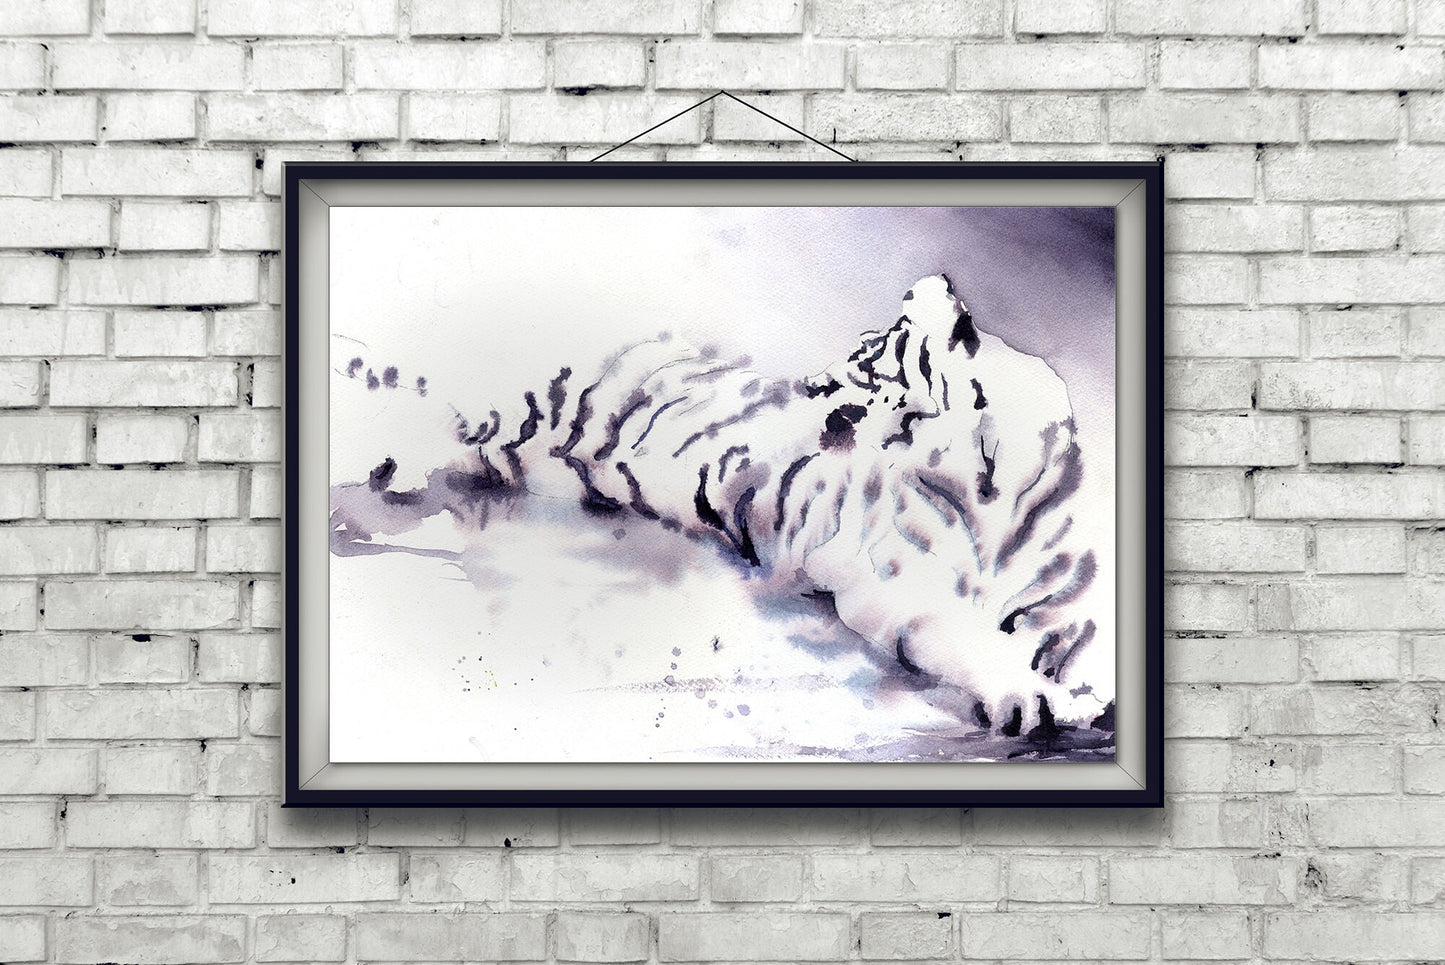 Tiger lying on ground.  Tiger art watercolor painting monochromatic African tiger artwork decor big cat painting.  Original watercolor art